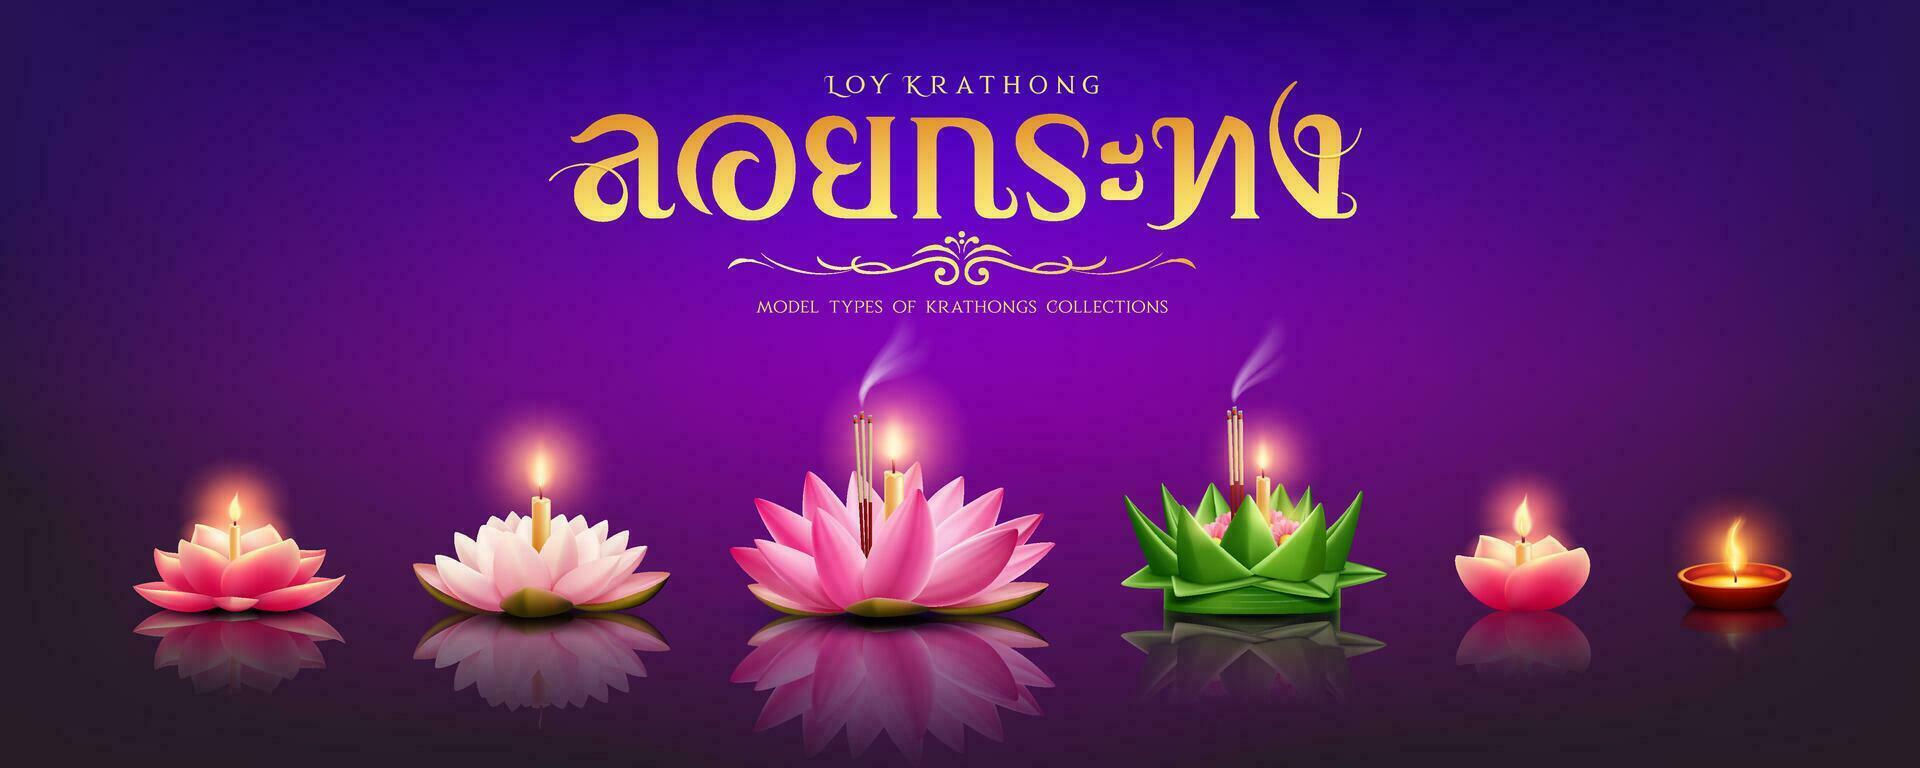 Model types of krathongs collections, thai cultural traditions, thai calligraphy of Loy Krathong pink and white lotus flower, banana leaf, design on purple background, vector illustration